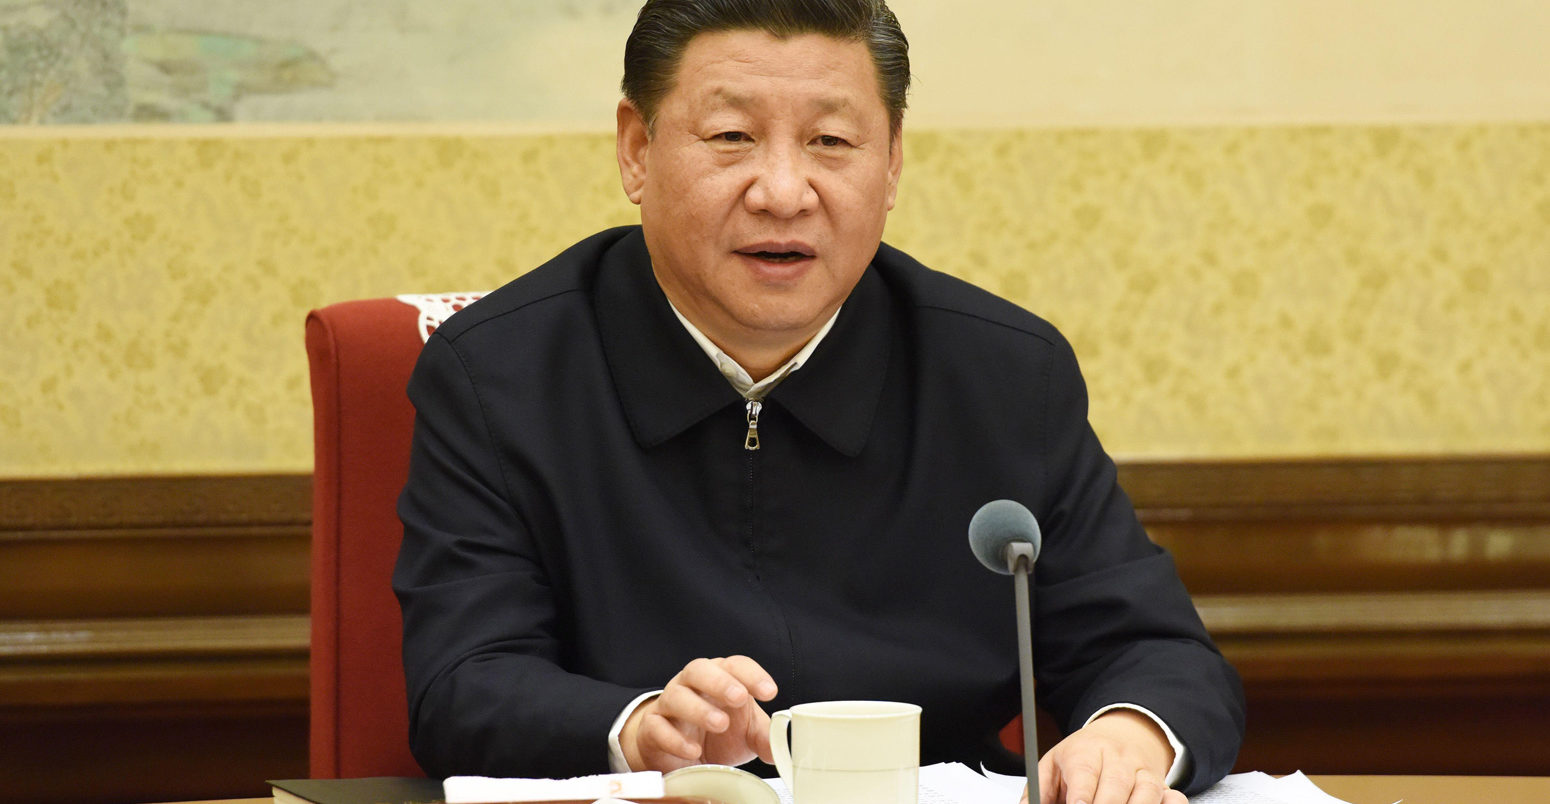 President Xi presiding over a meeting of the Political Bureau of the Central Committee of the Communist Party of China